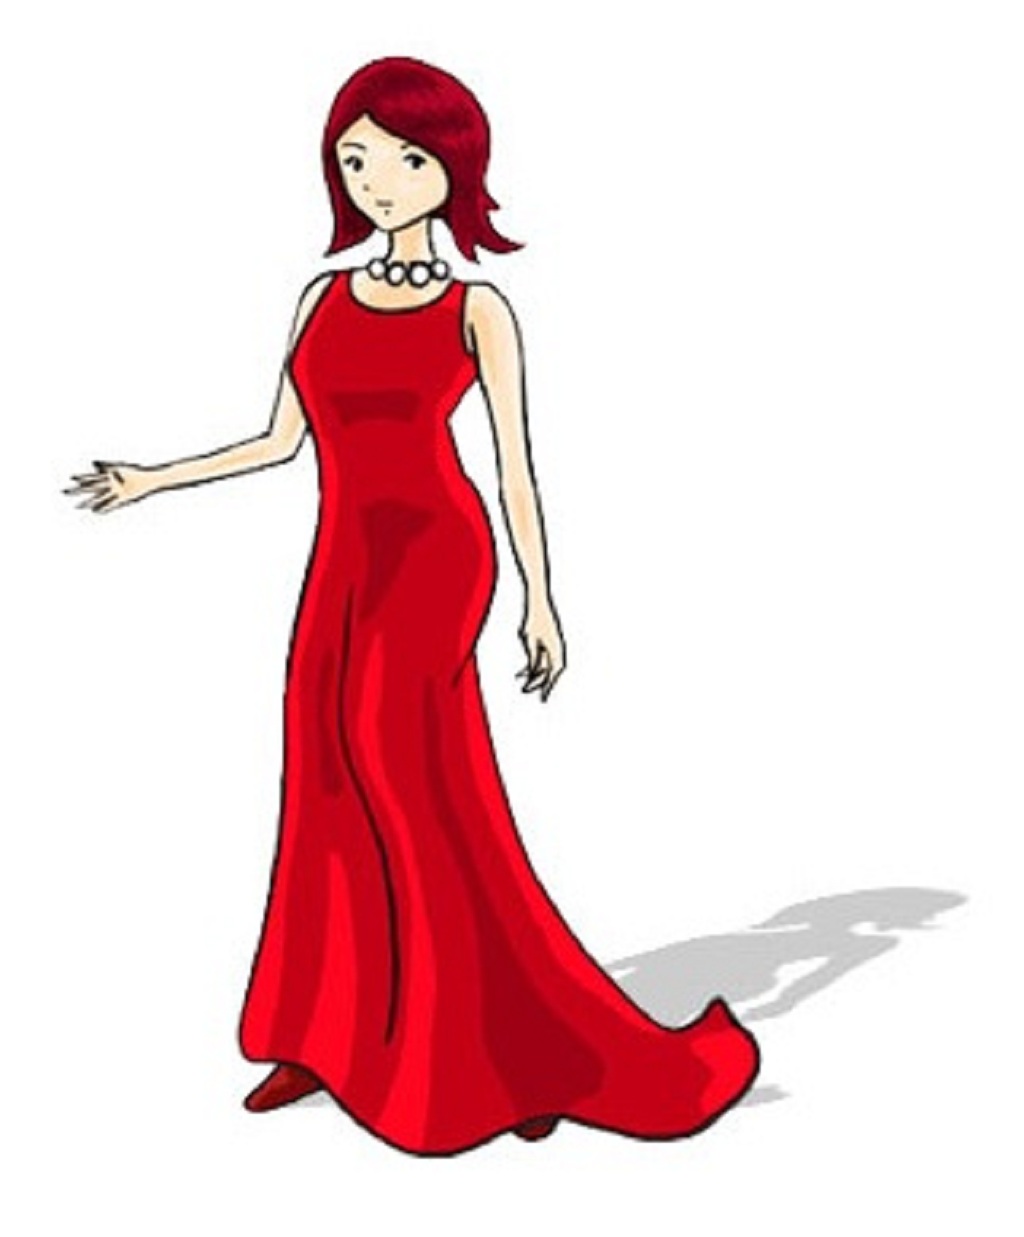 free clipart images woman - photo #1